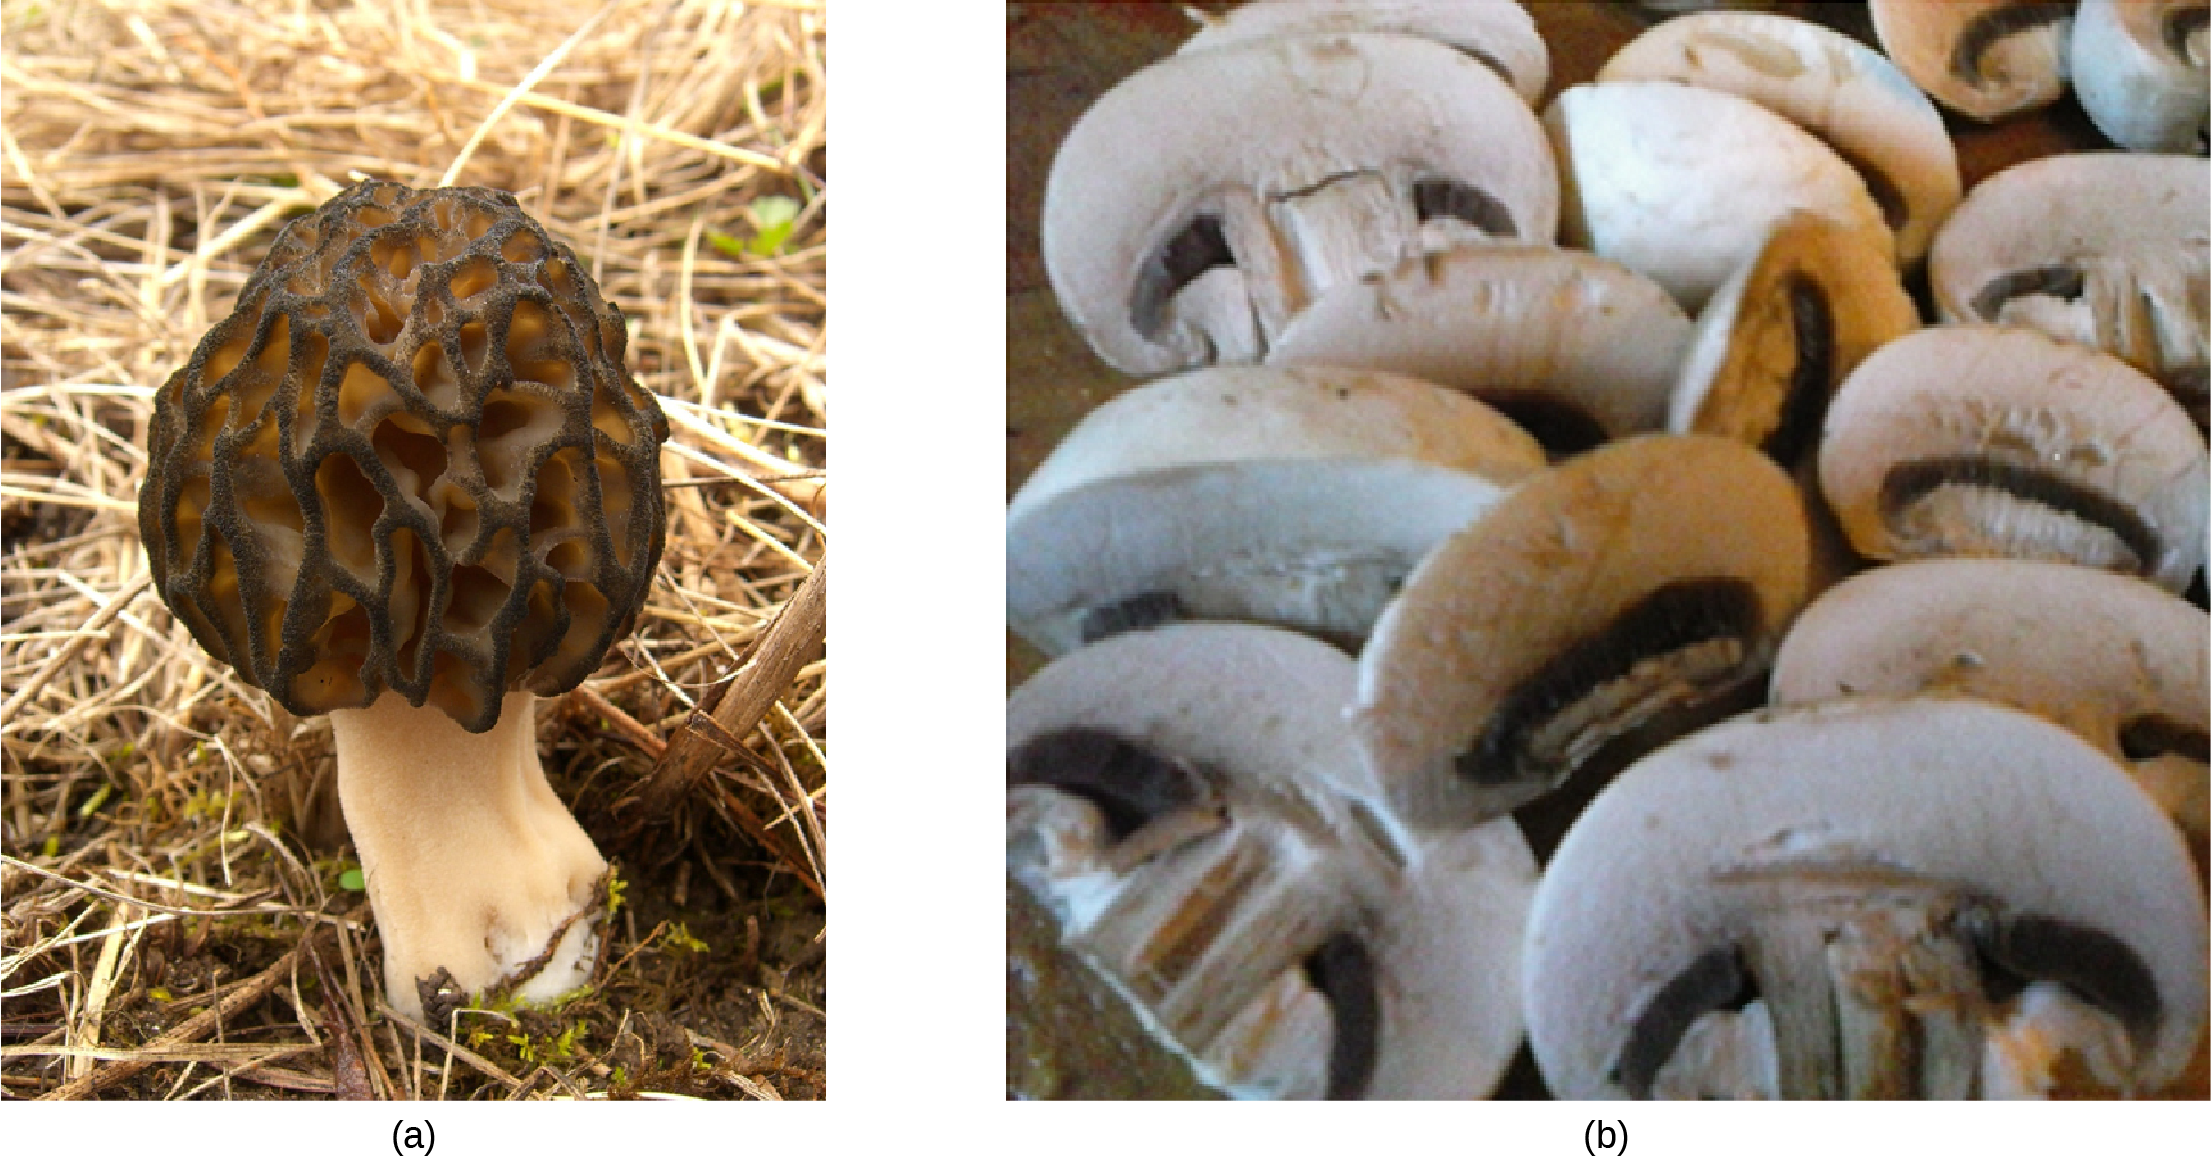 Part a Photo shows a mushroom with a convoluted black cap. Part b shows a pile of sliced mushrooms similar to ones people would see in a food store.